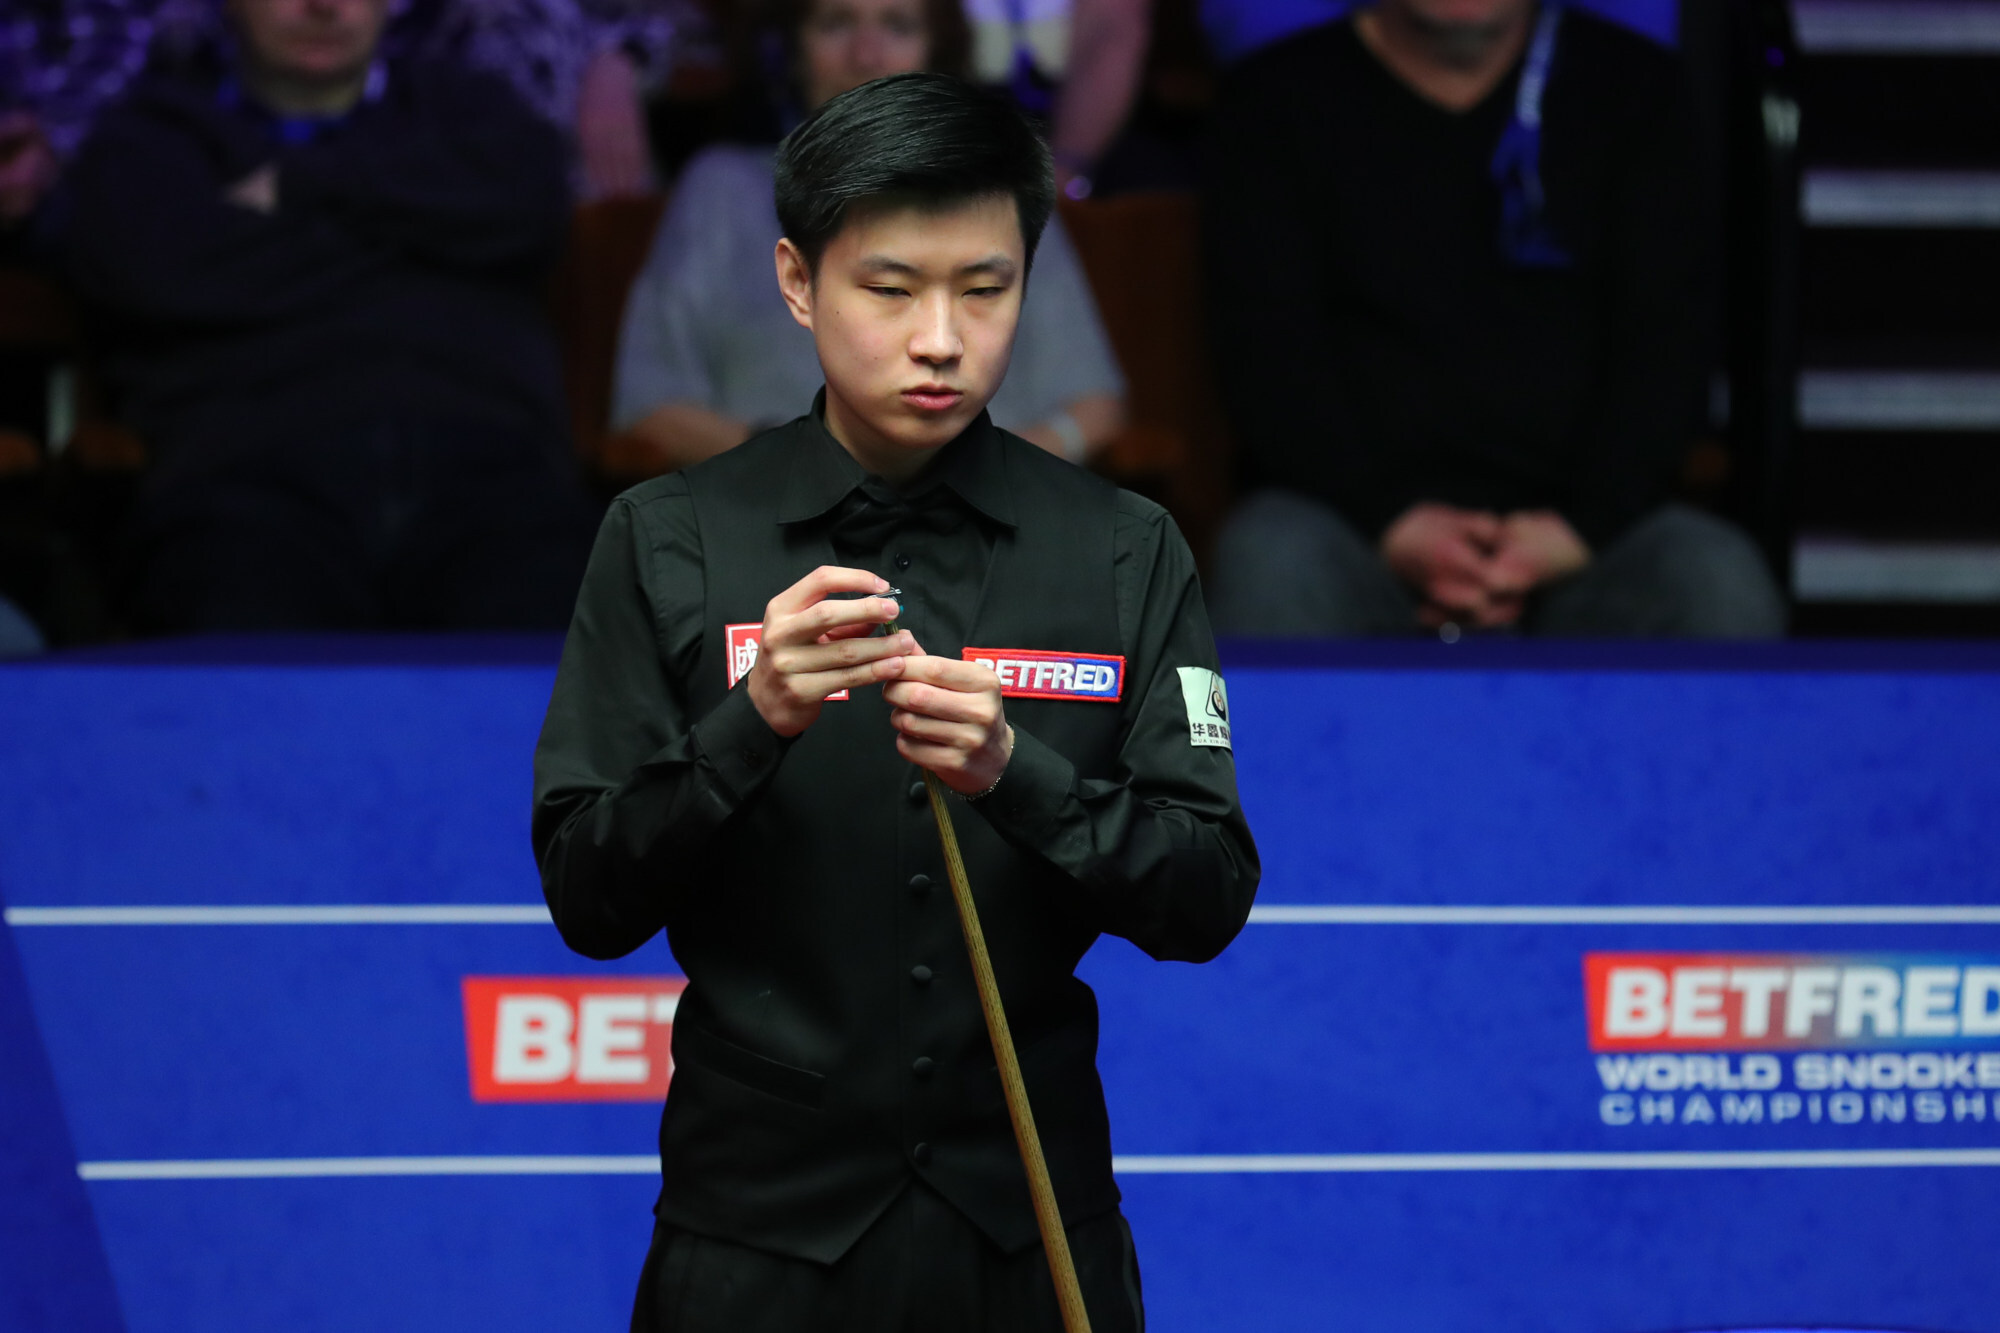 World Championship 2022 Chinas Yan Bingtao homing in on victory over champion Mark Selby after pigeon storms Crucible South China Morning Post